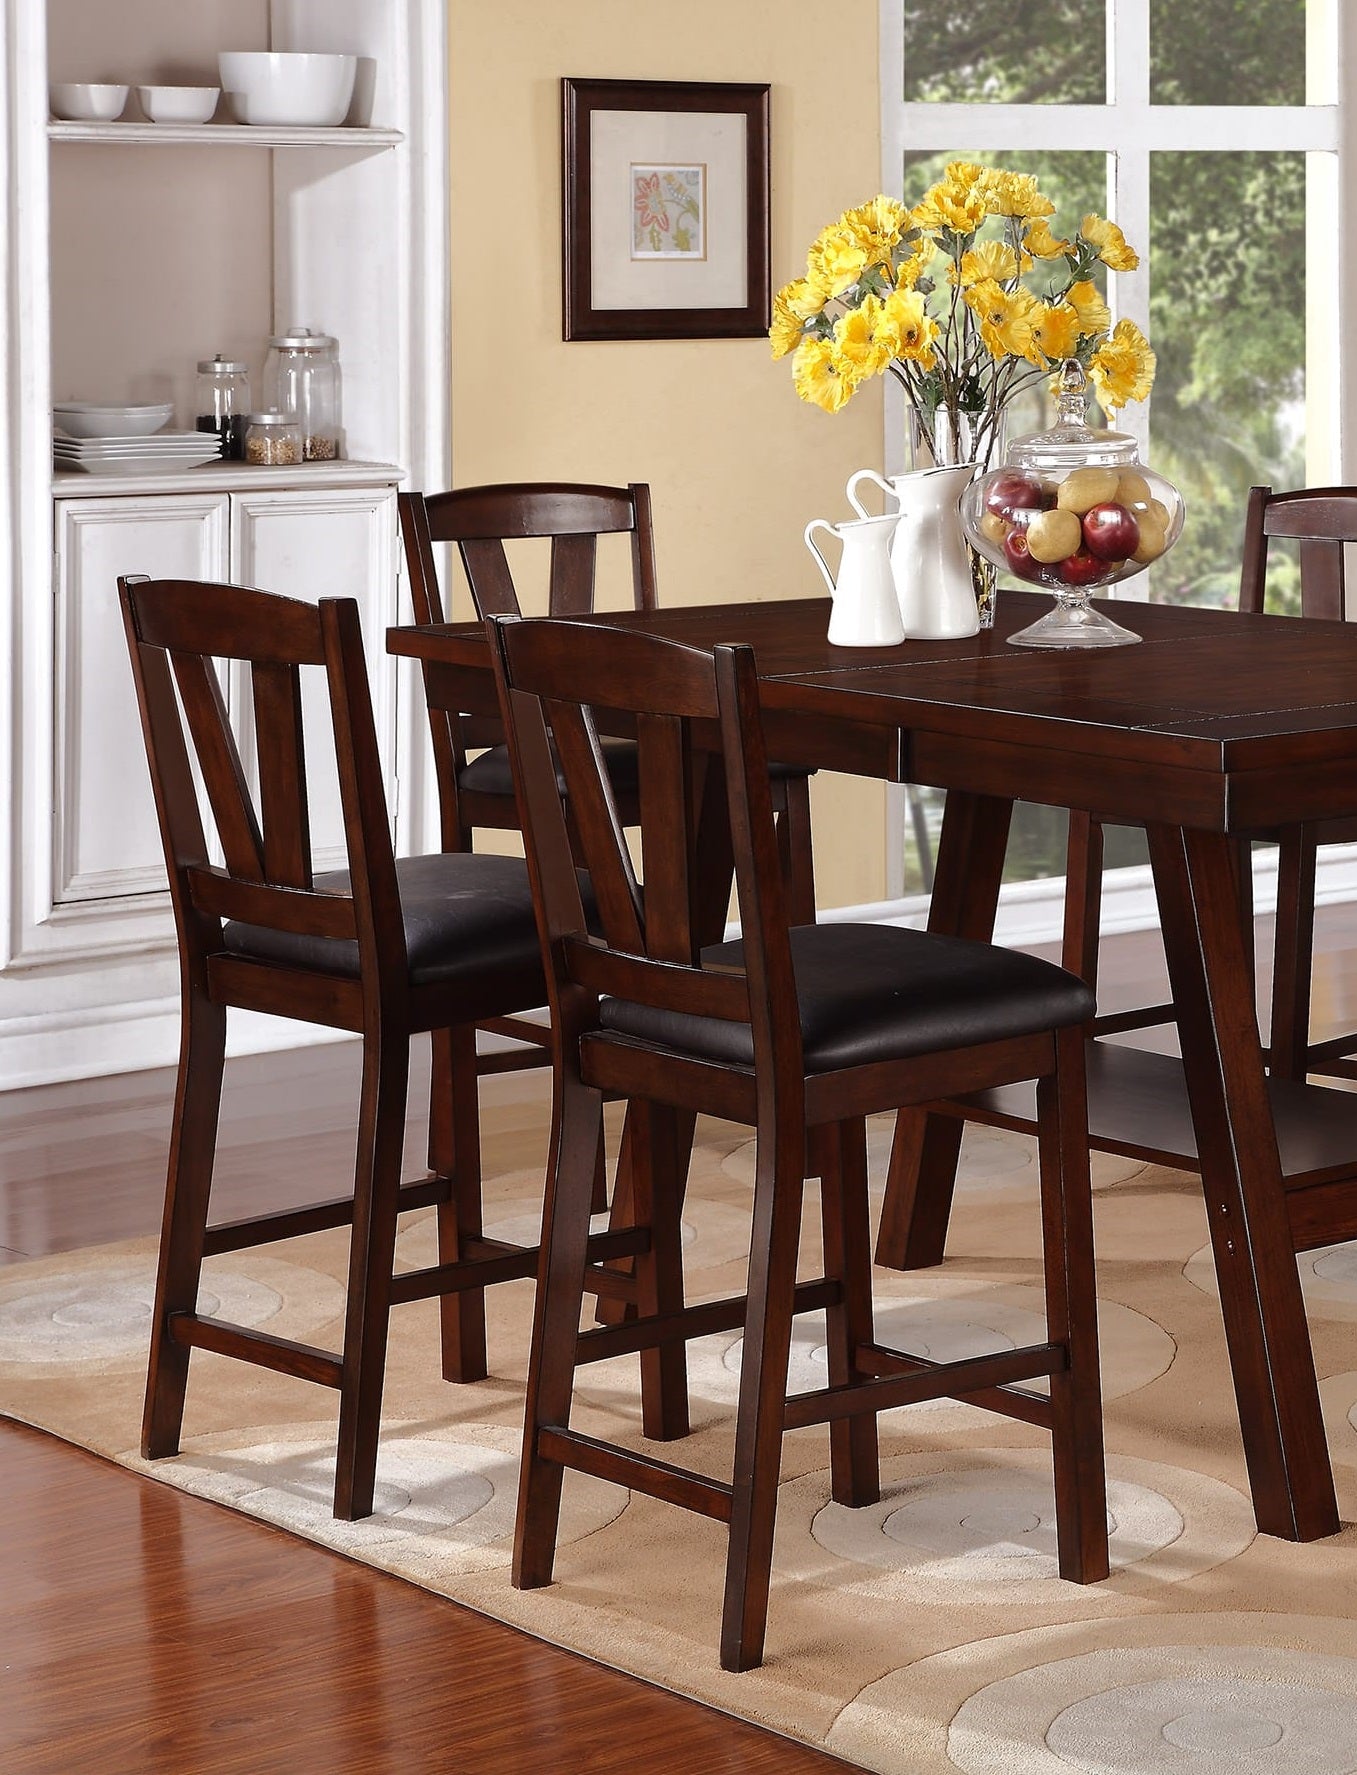 ZNTS Dark Walnut Wood Framed Back Set of 2 Counter Height Dining Chairs Breakfast Kitchen Cushion Seats B01158666